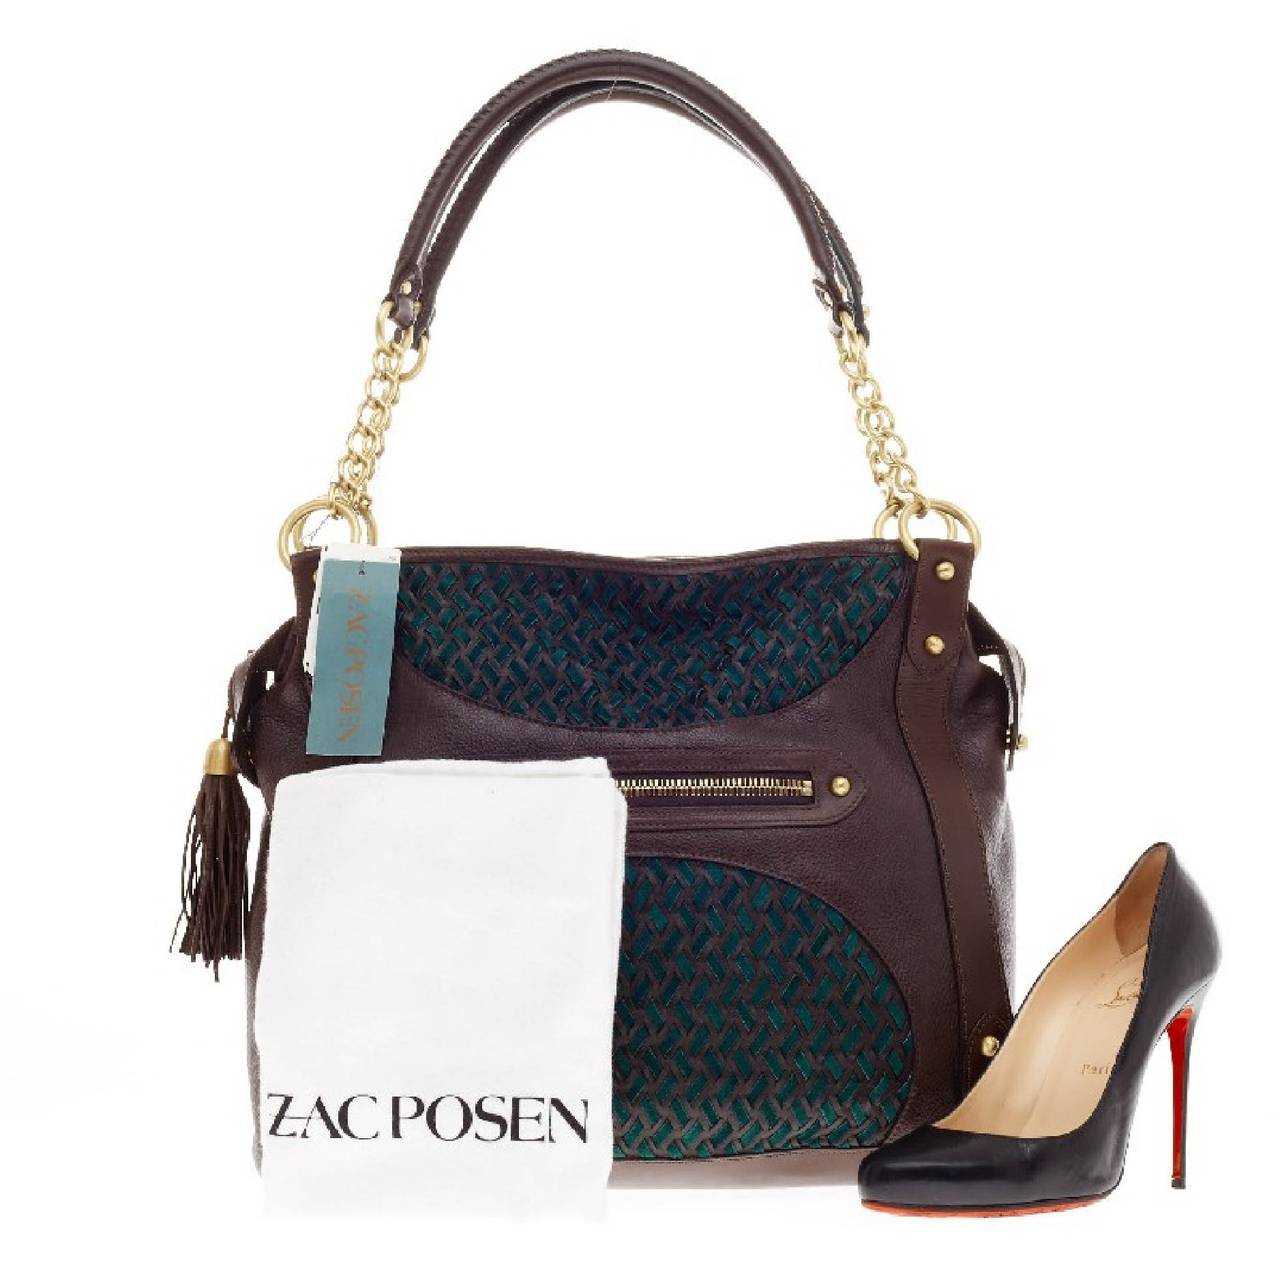 This authentic Zac Posen Lauren Tote Woven Leather will add style to any daily casual outfit. Constructed in brown leather with elegant woven green suede details, this beautiful tote features dual gold chain straps with tassel charms and leather